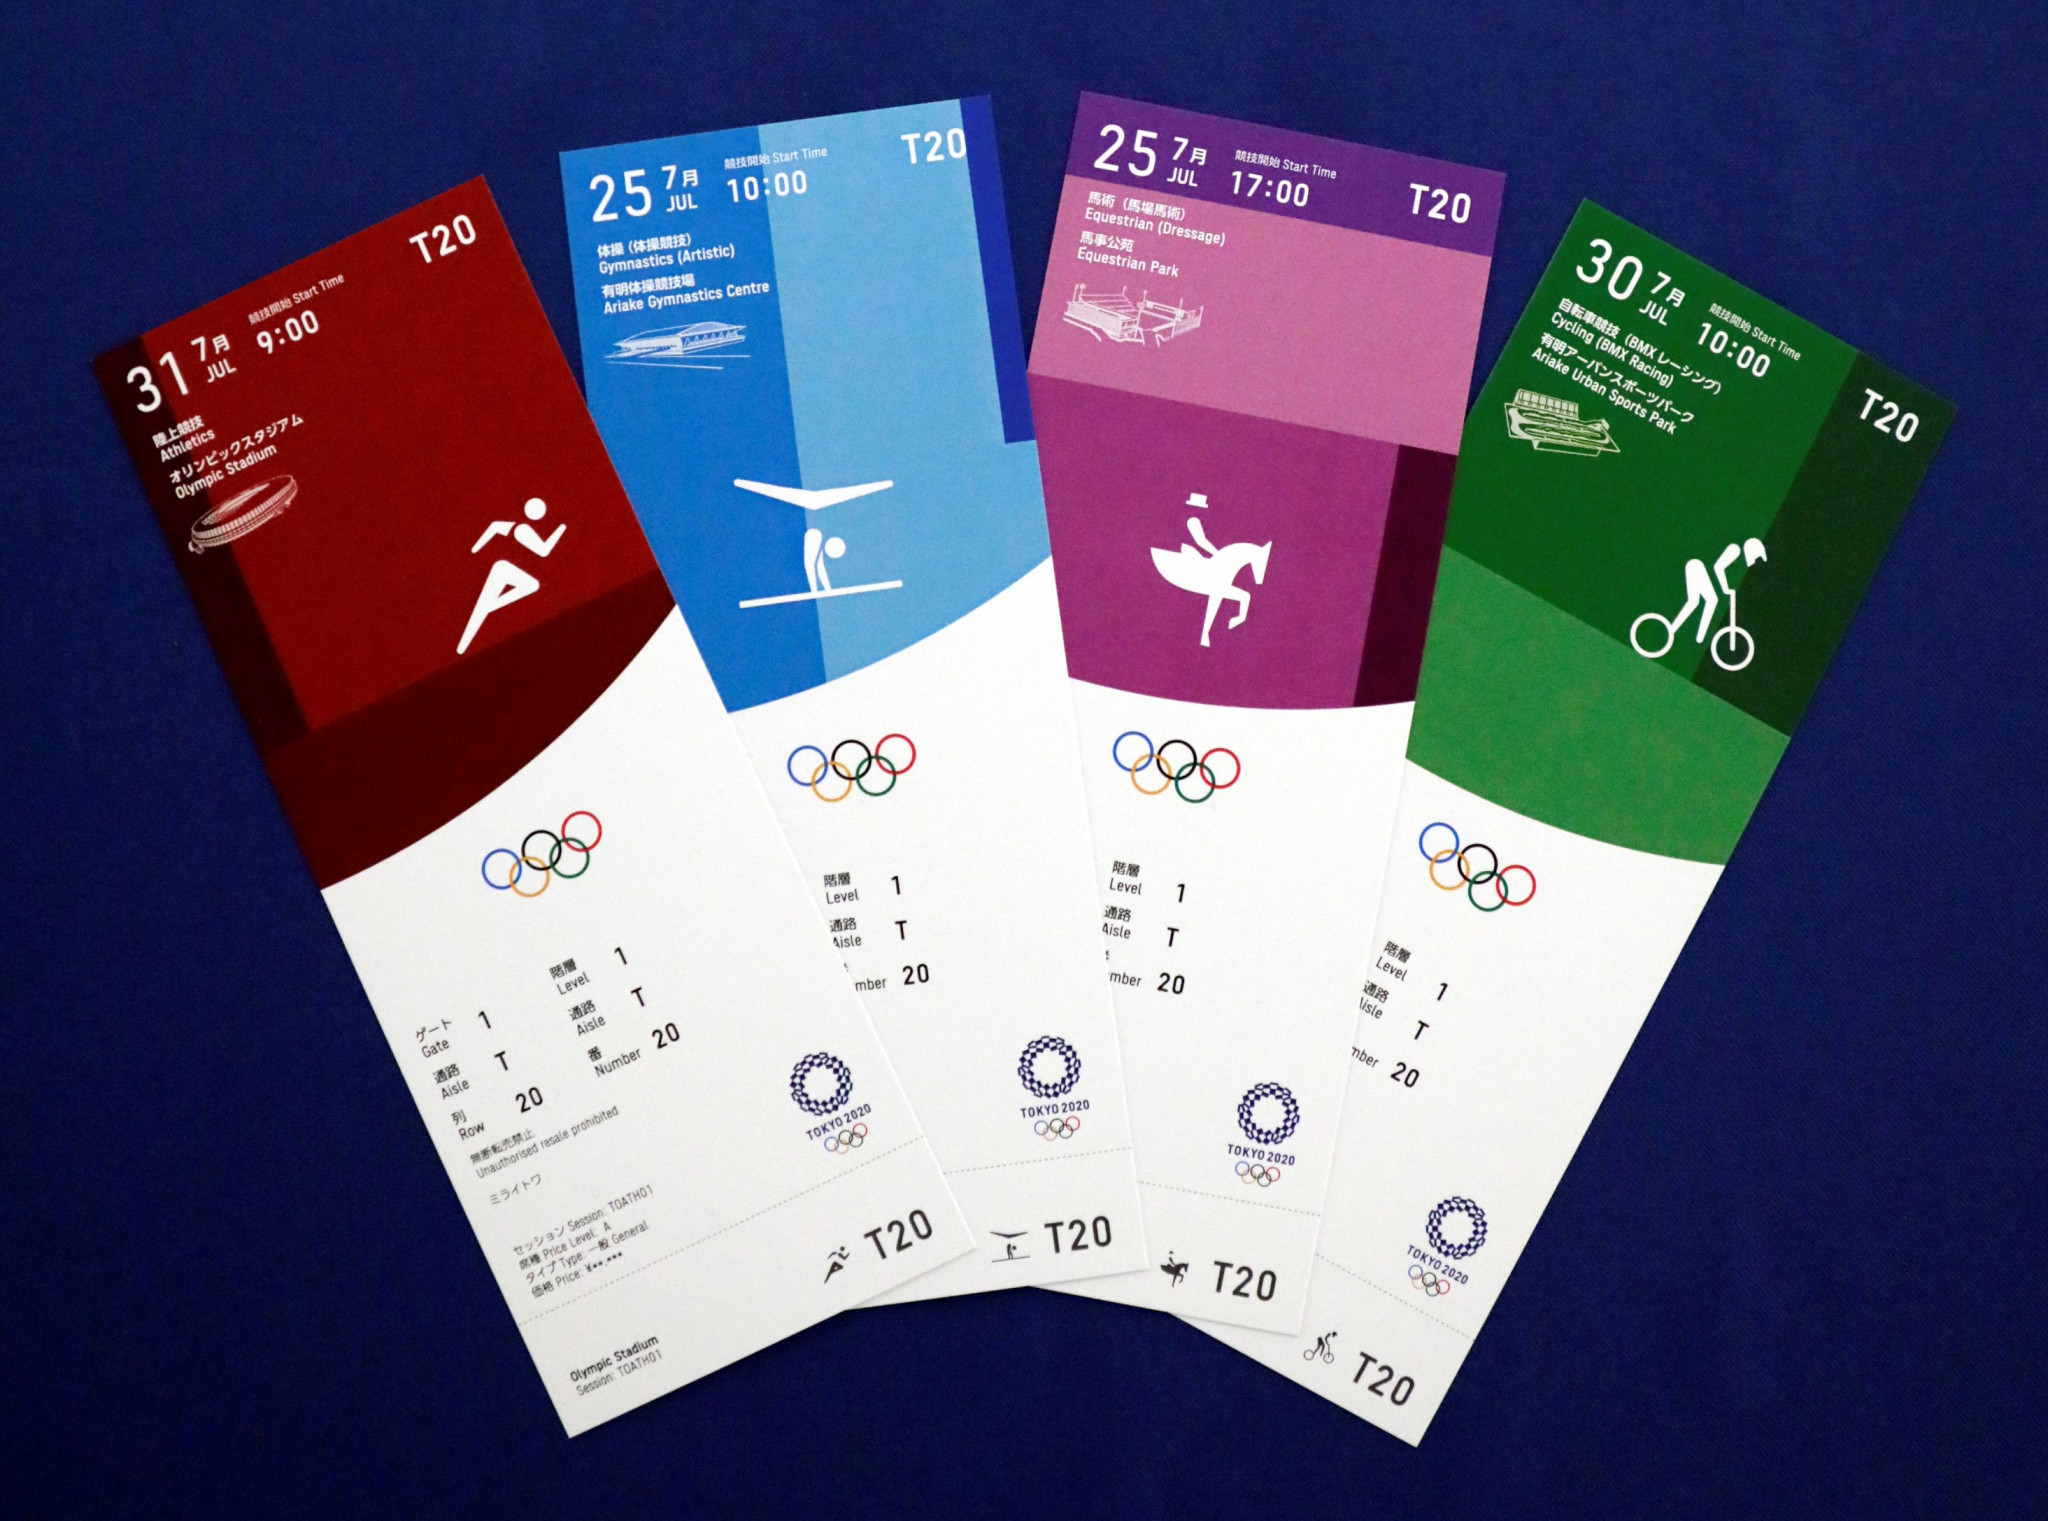 Residents of Japan can enter a postcard lottery for the opportunity to buy Tokyo 2020 Olympic tickets from today ©Tokyo 2020